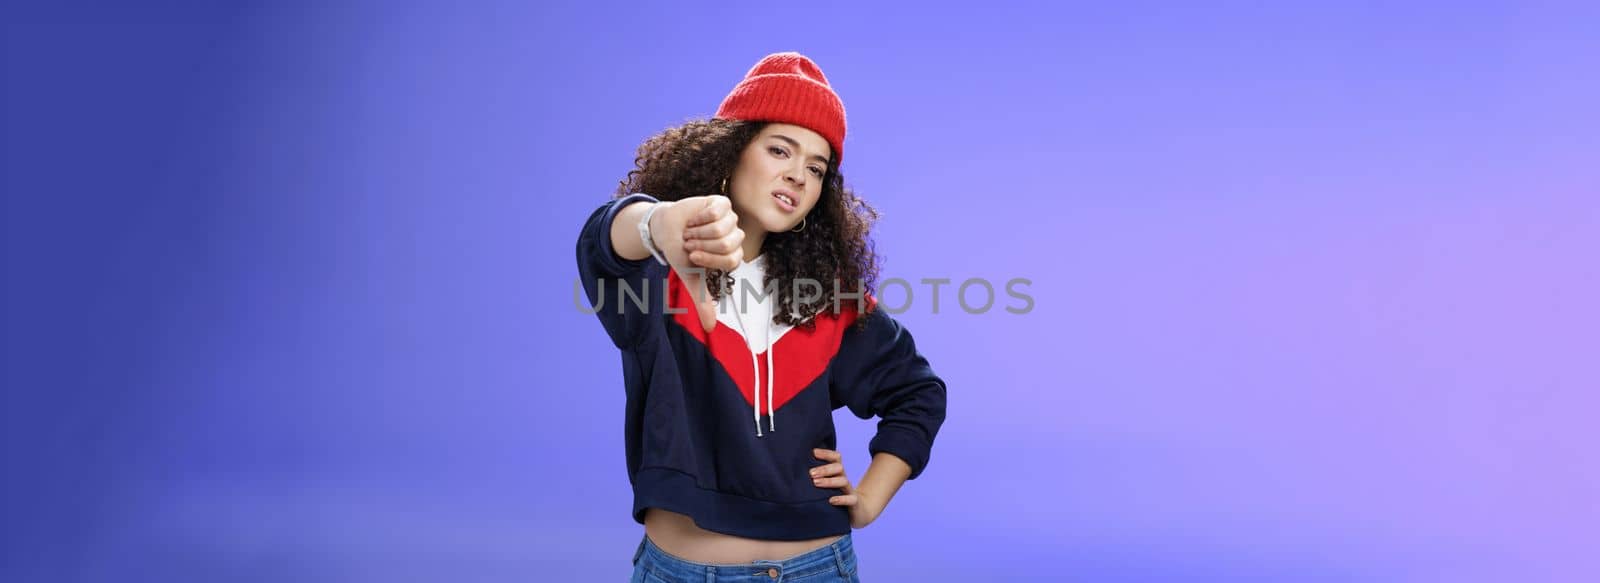 Nah dislike. Portrait of annoyed and unimpressed arrogant cool girl with curly hair tilting head with distain and scorn showing thumbs down in disappointment grimacing, posing over blue wall by Benzoix